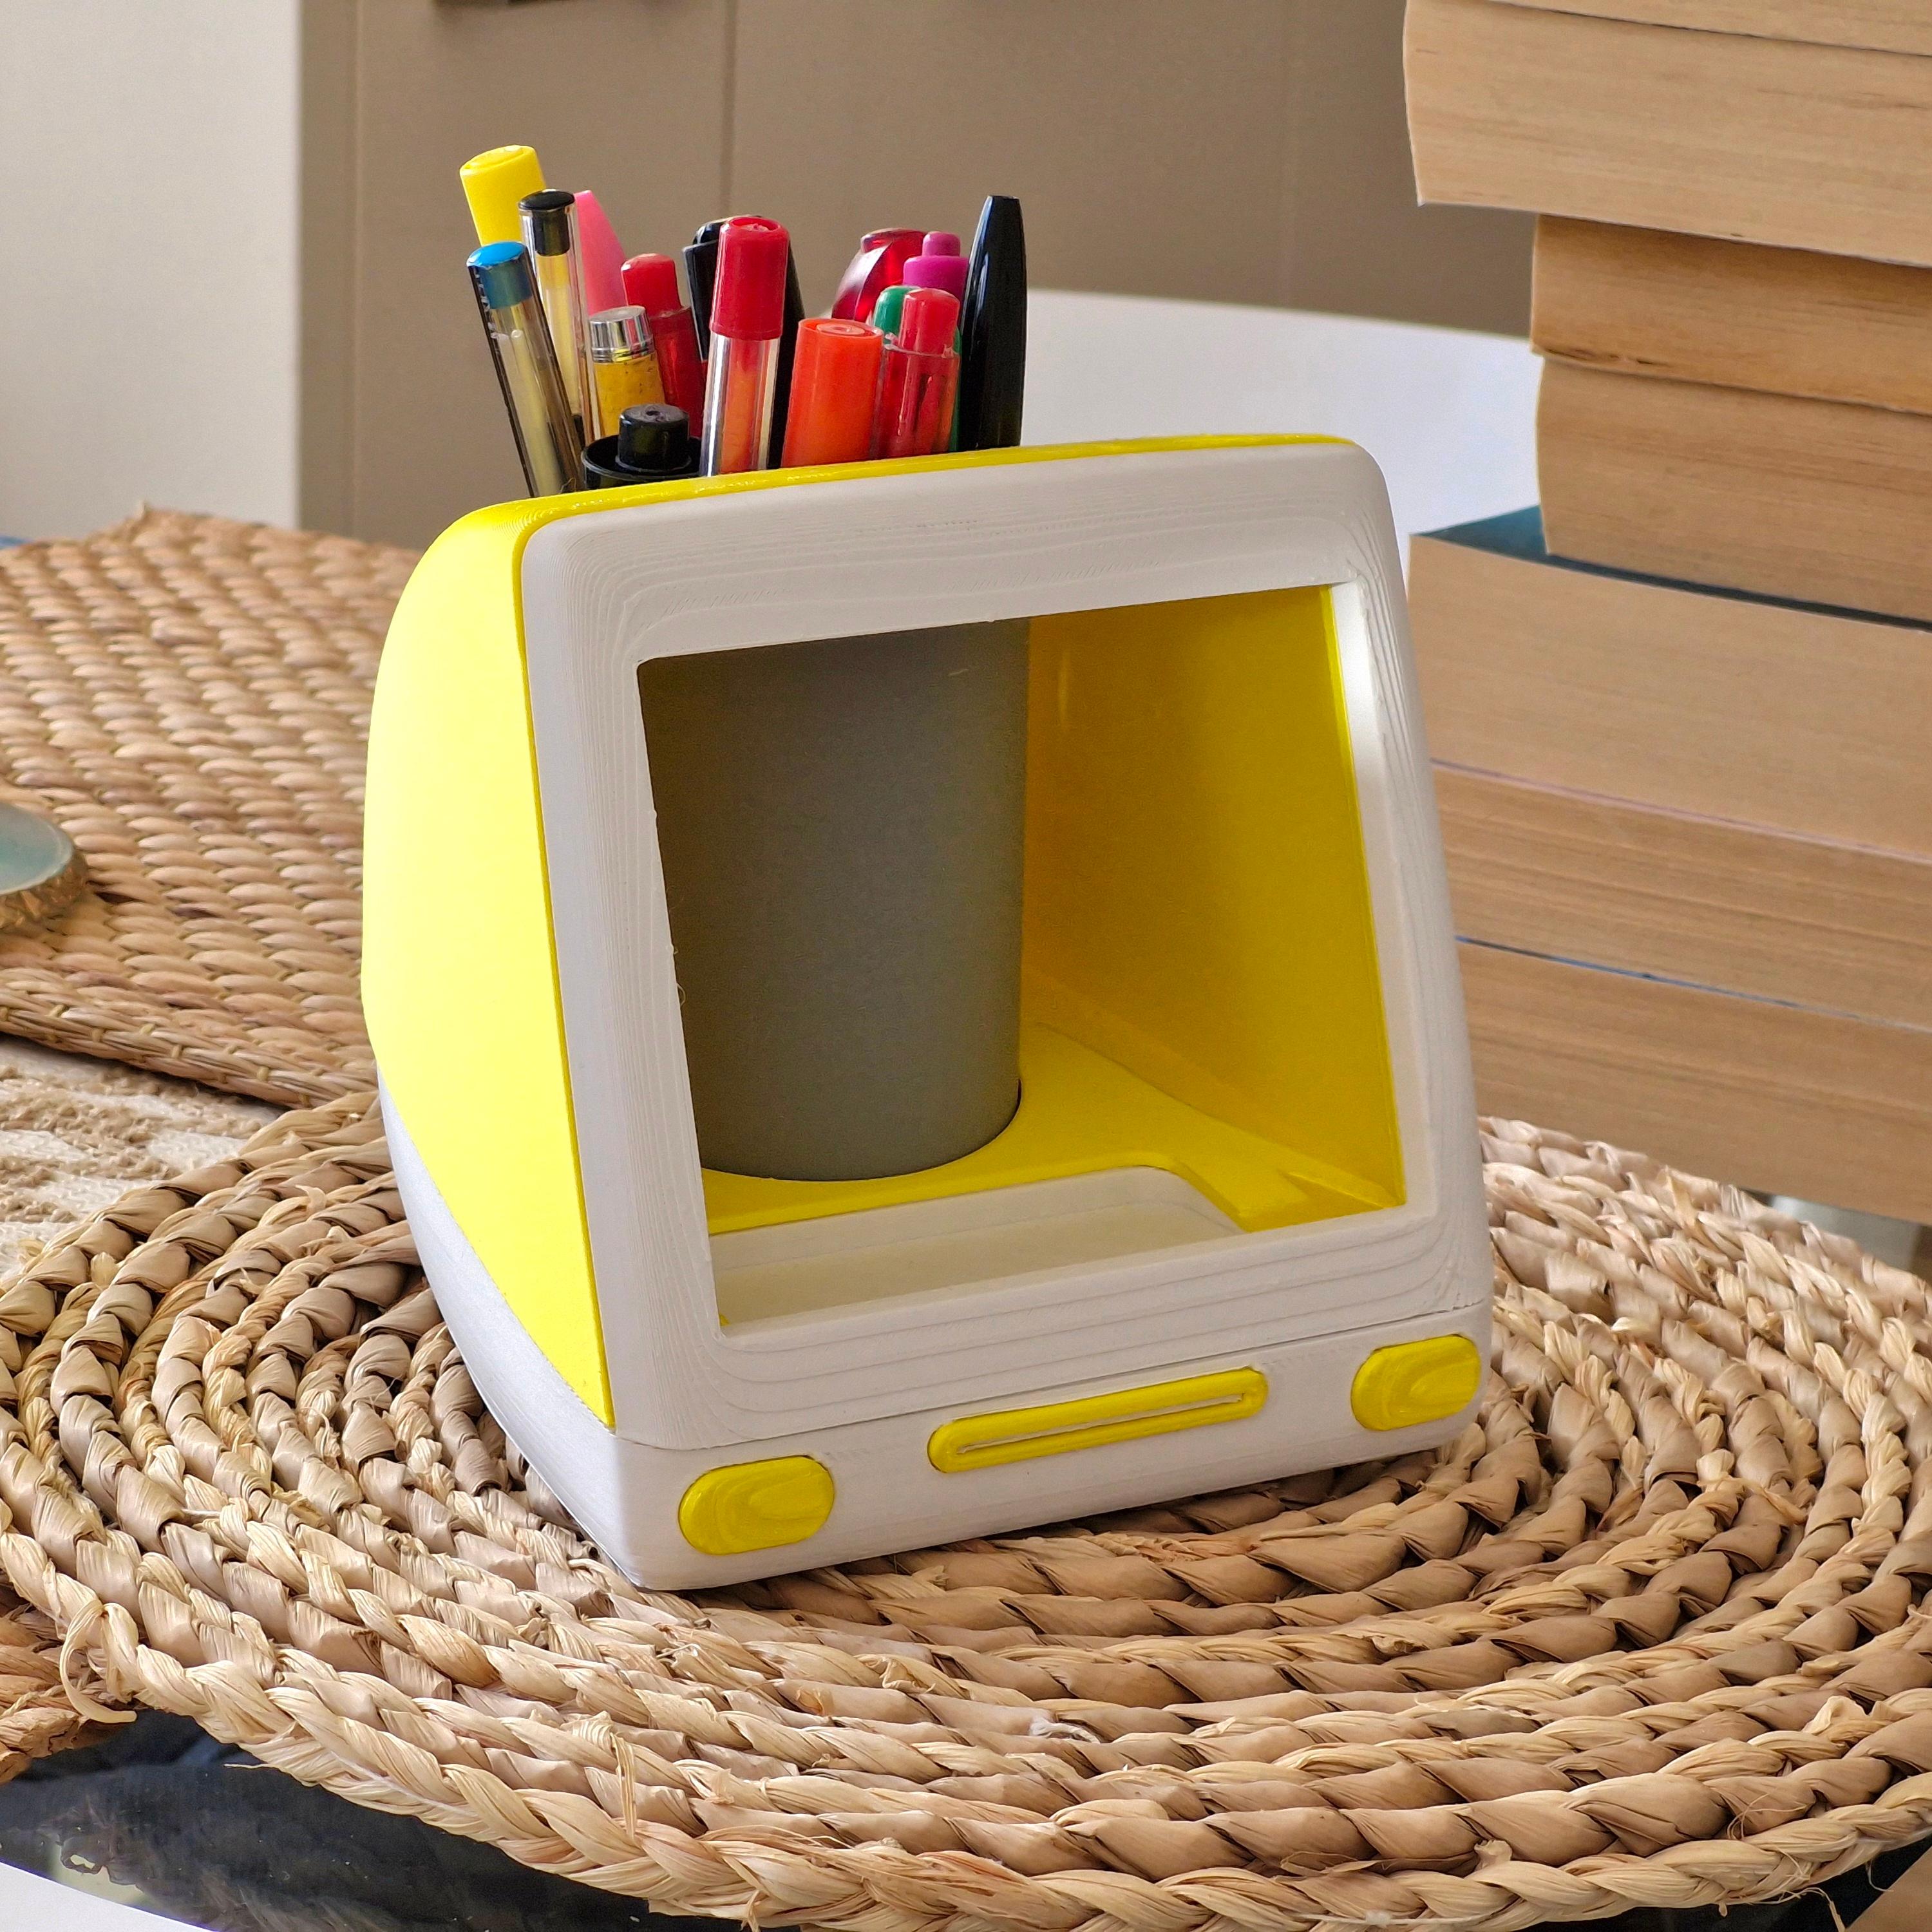 iMac G3 Style Stationery Pot - FREE THIS WEEK! 3d model